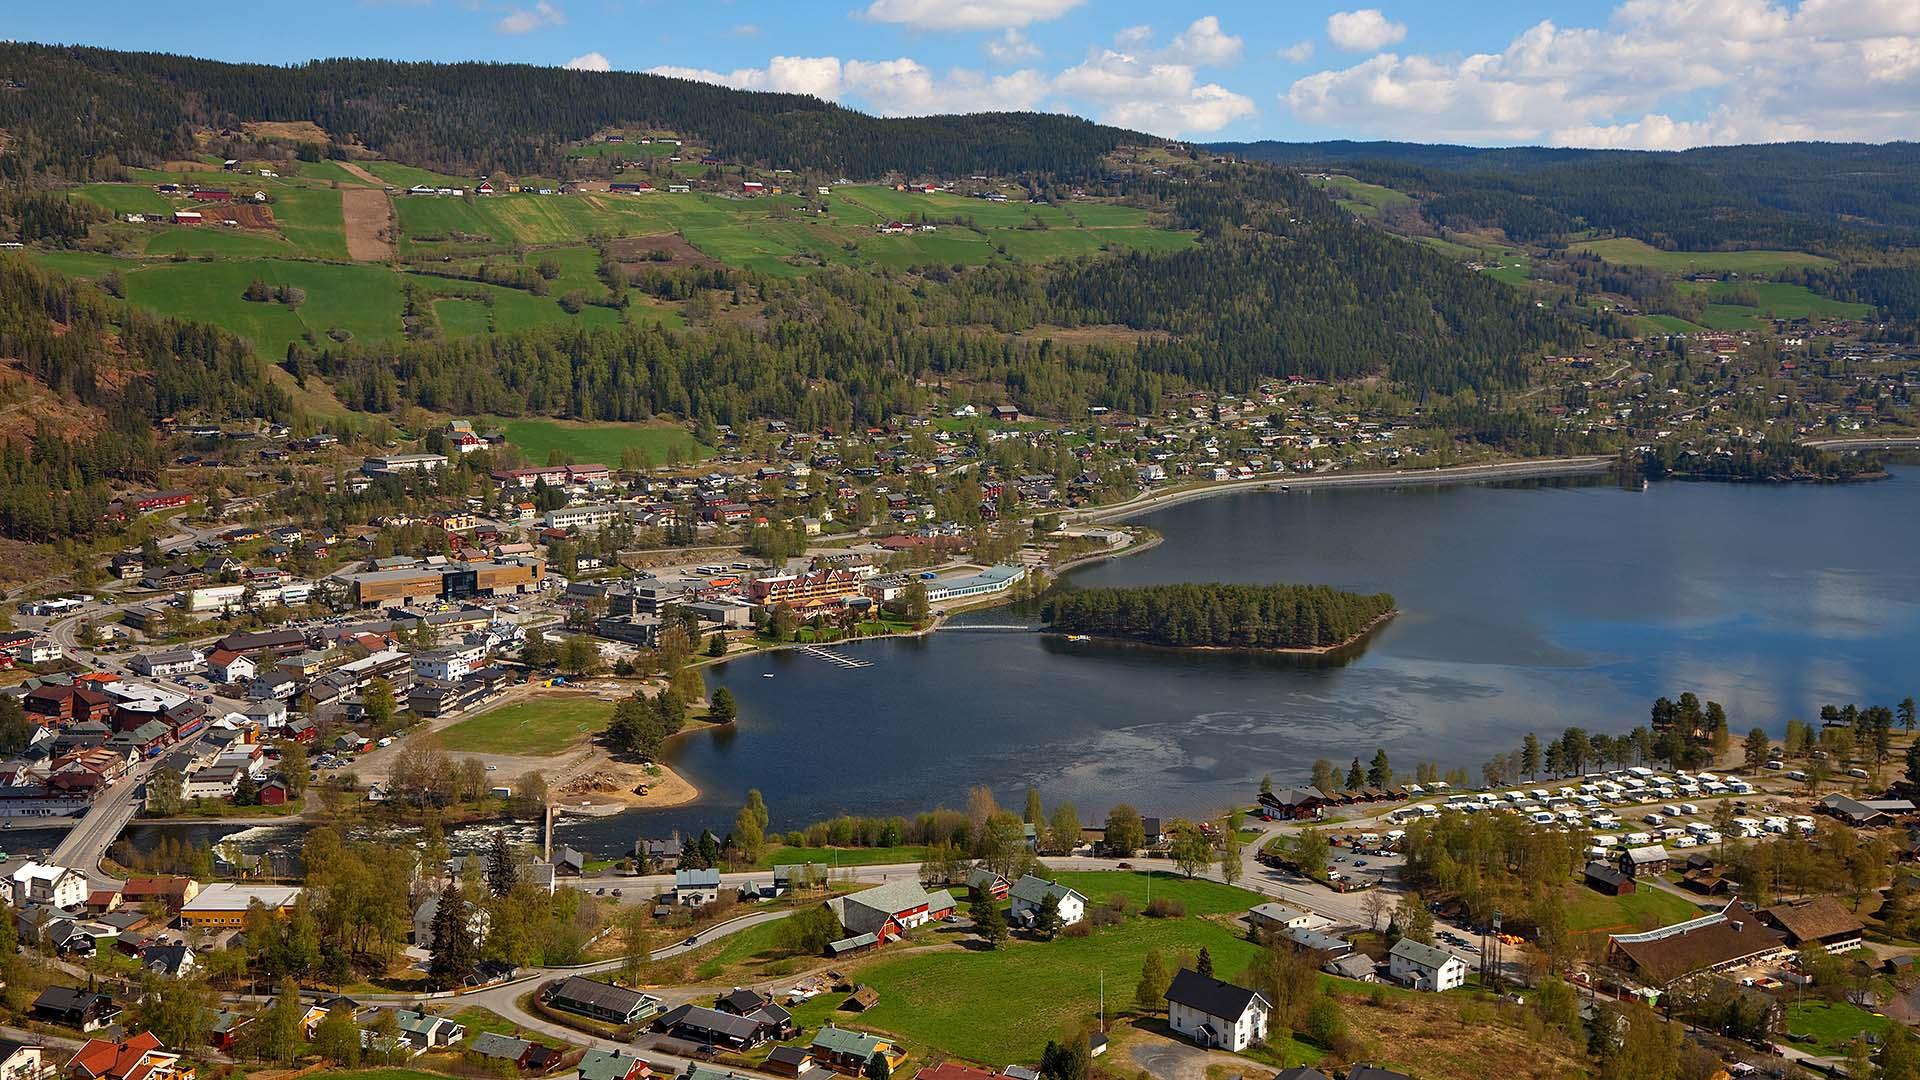 View over a small town situated on the outflow of a river into a lake. There's an island in the lake and green field on the hillsides beyond.